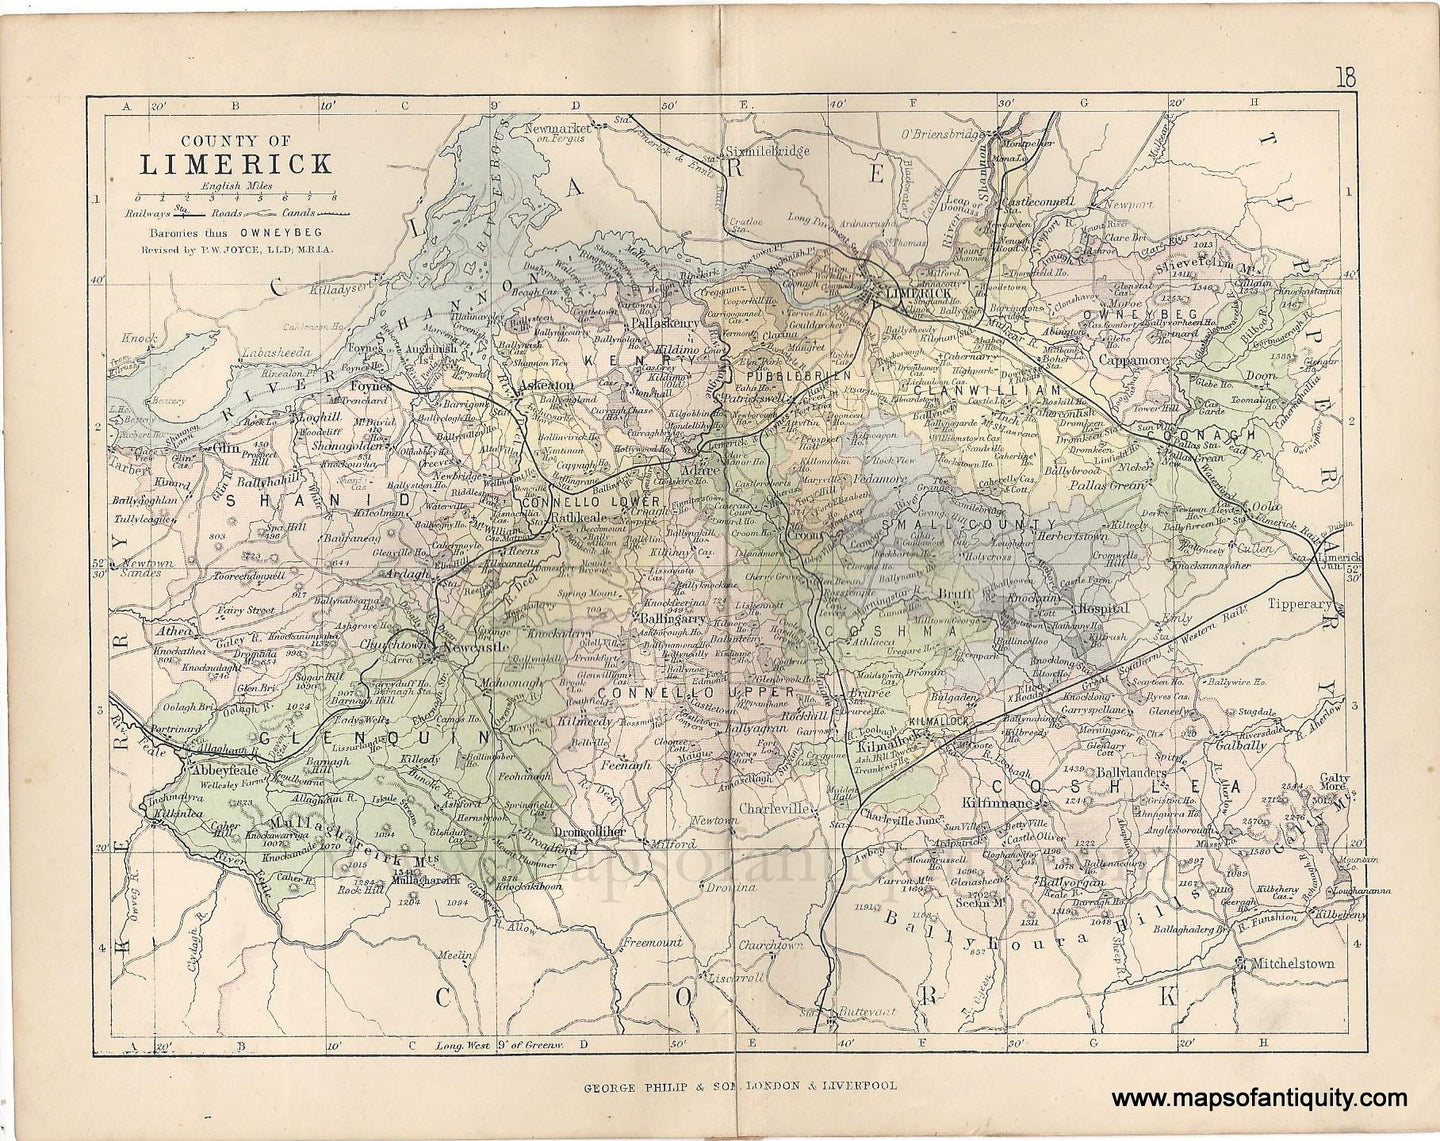 Genuine-Antique-Map-Ireland-County-of-Limerick-1884-George-Philip-&-Son-Maps-Of-Antiquity